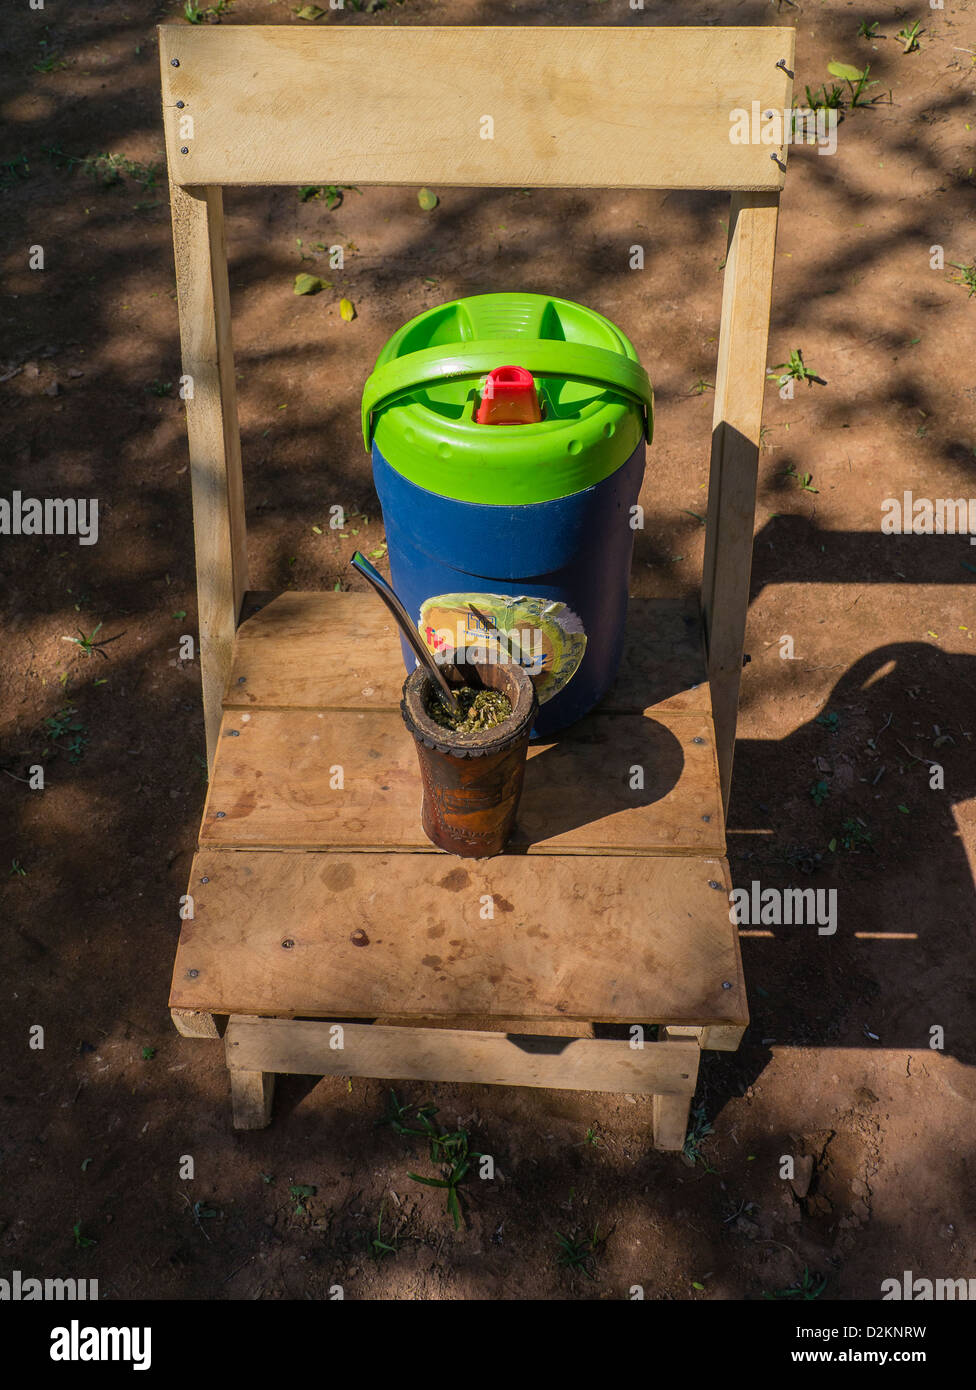 https://c8.alamy.com/comp/D2KNRW/a-thermos-with-yerba-mate-leaves-to-make-a-traditional-drink-and-cup-D2KNRW.jpg